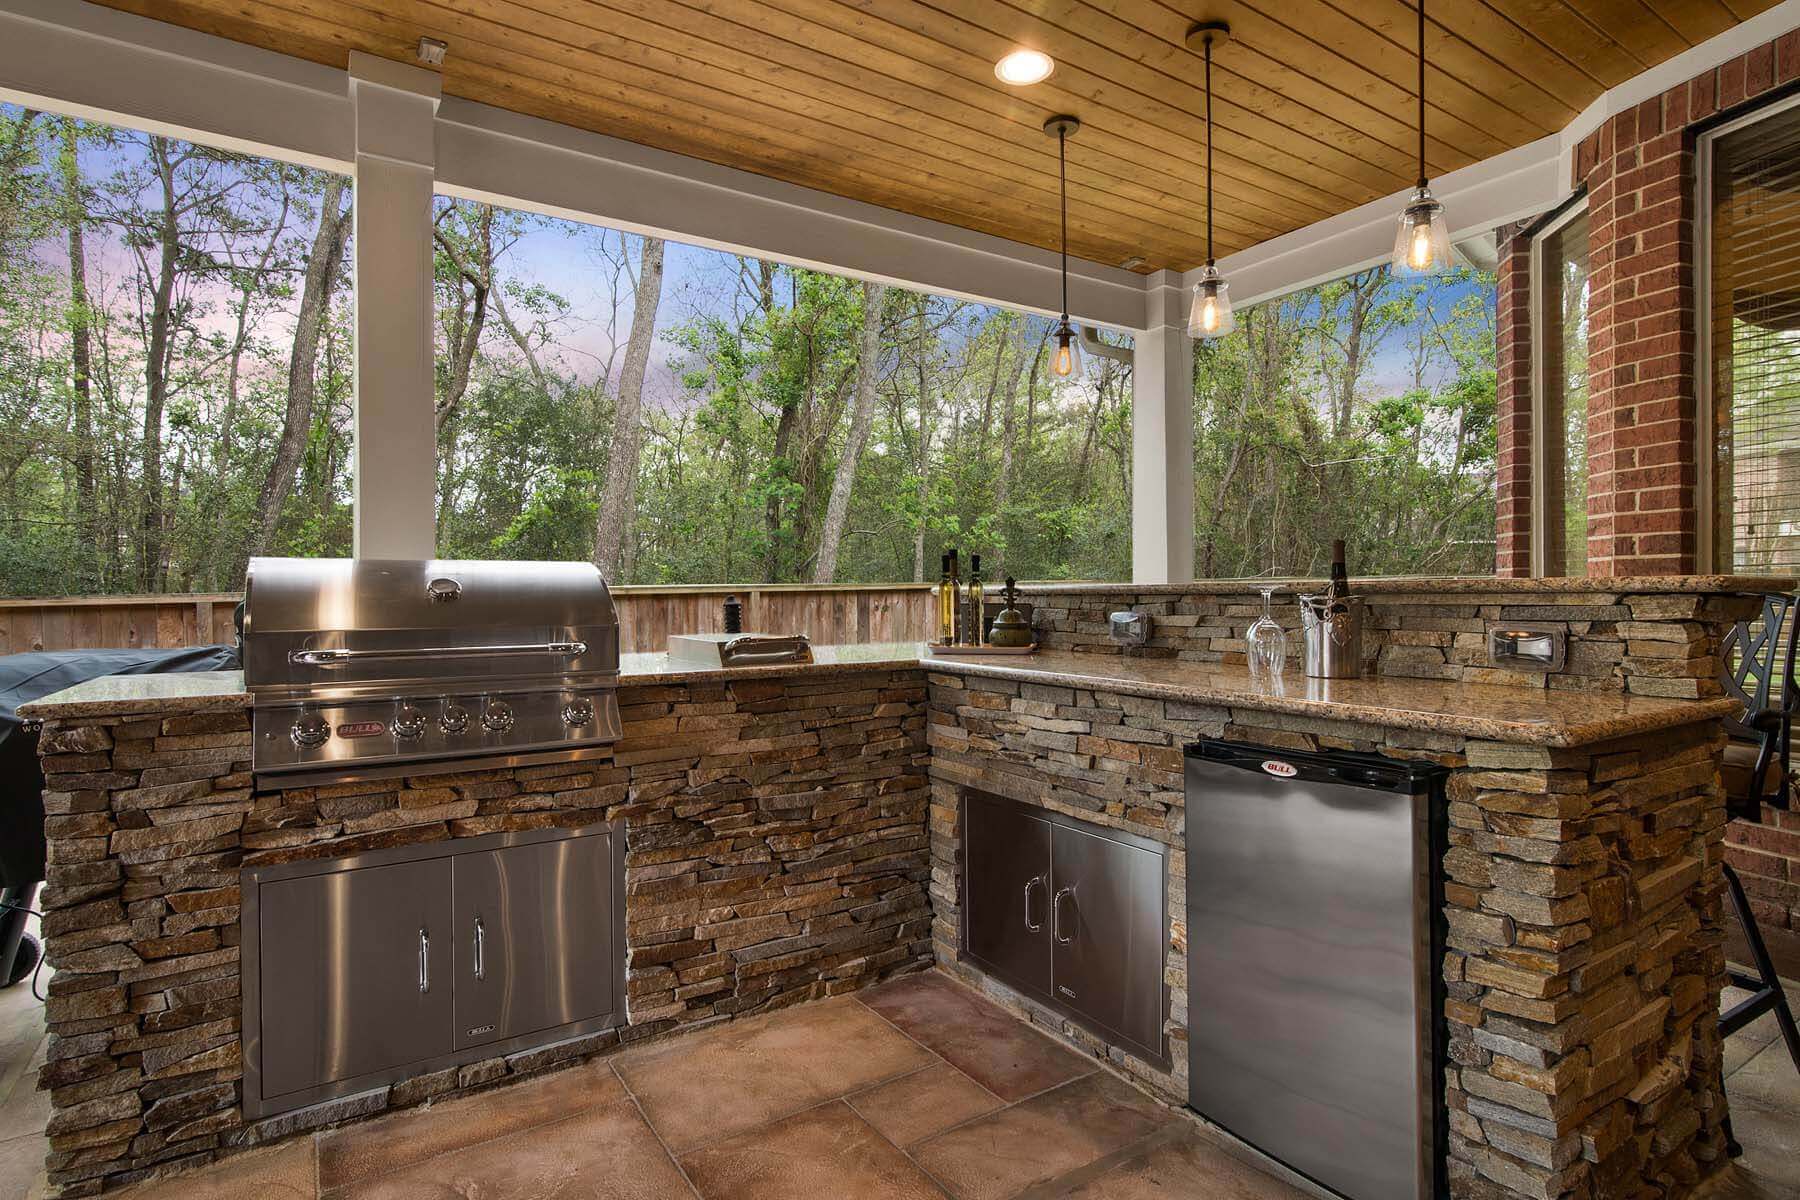 Outdoor kitchen and sink setup in a backyard covered patio